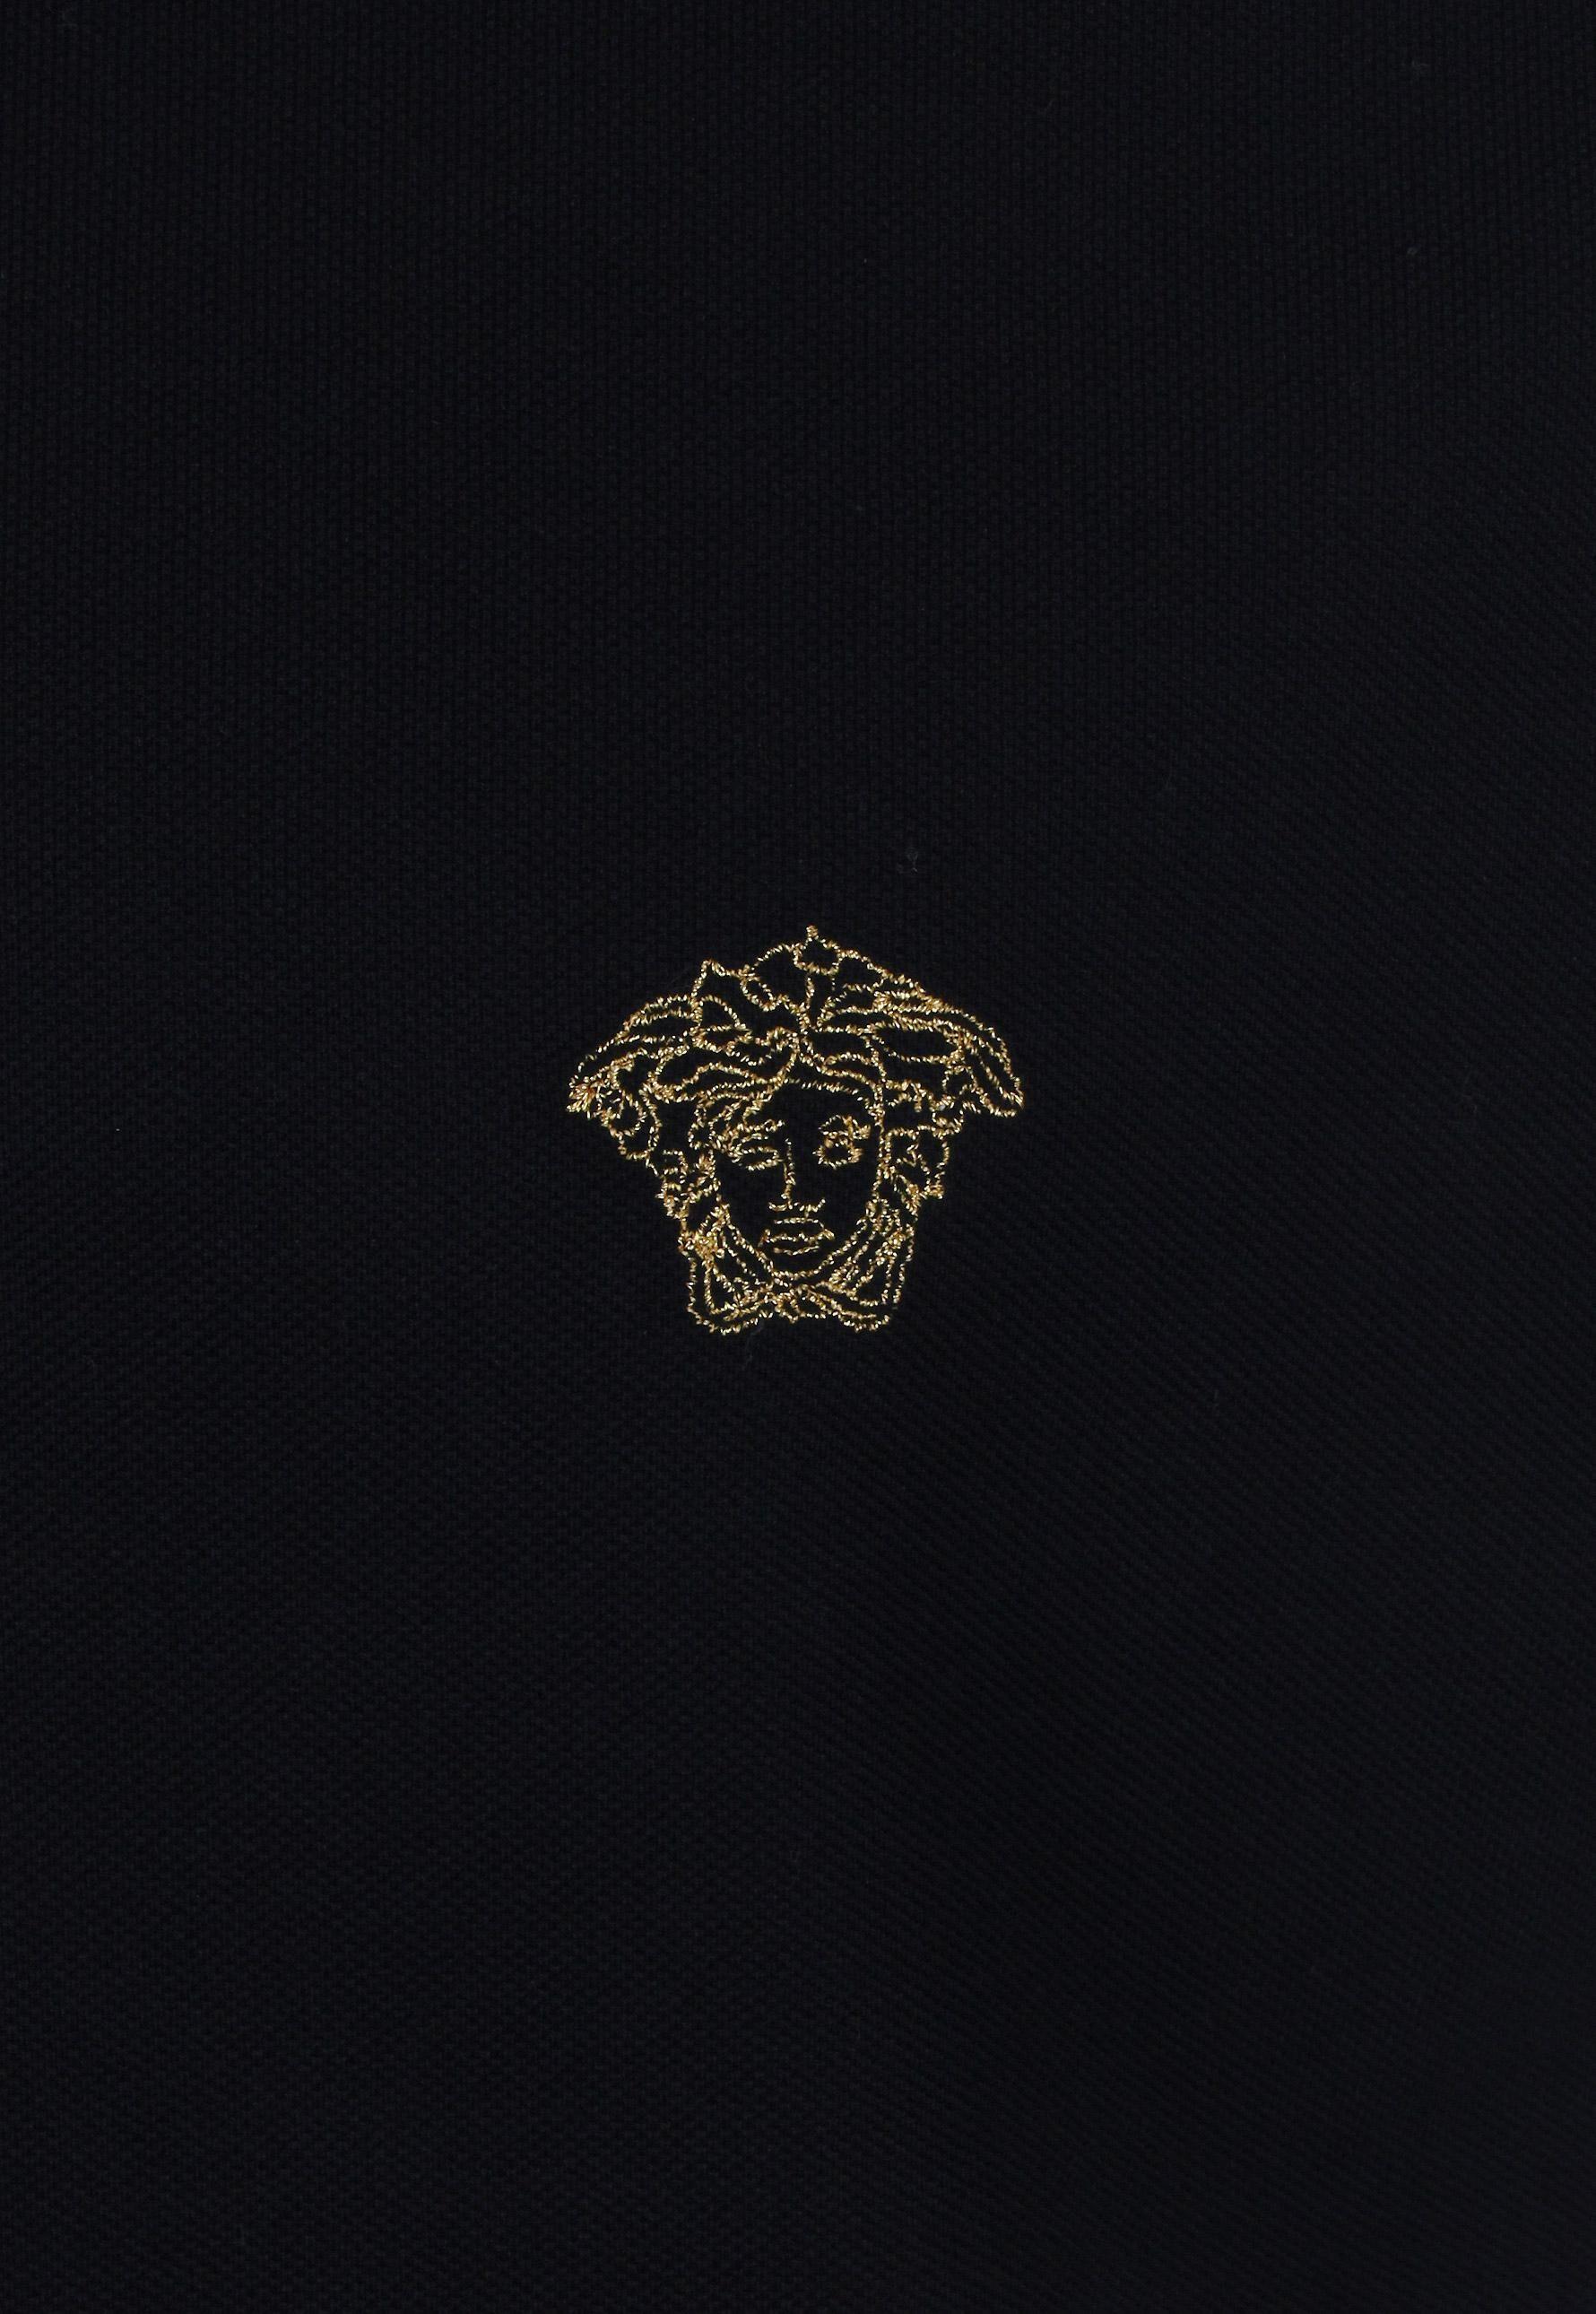 Black and Gold Versace Logo - Versace Embroidered Medusa Polo Shirt Black/gold in Black for Men - Lyst